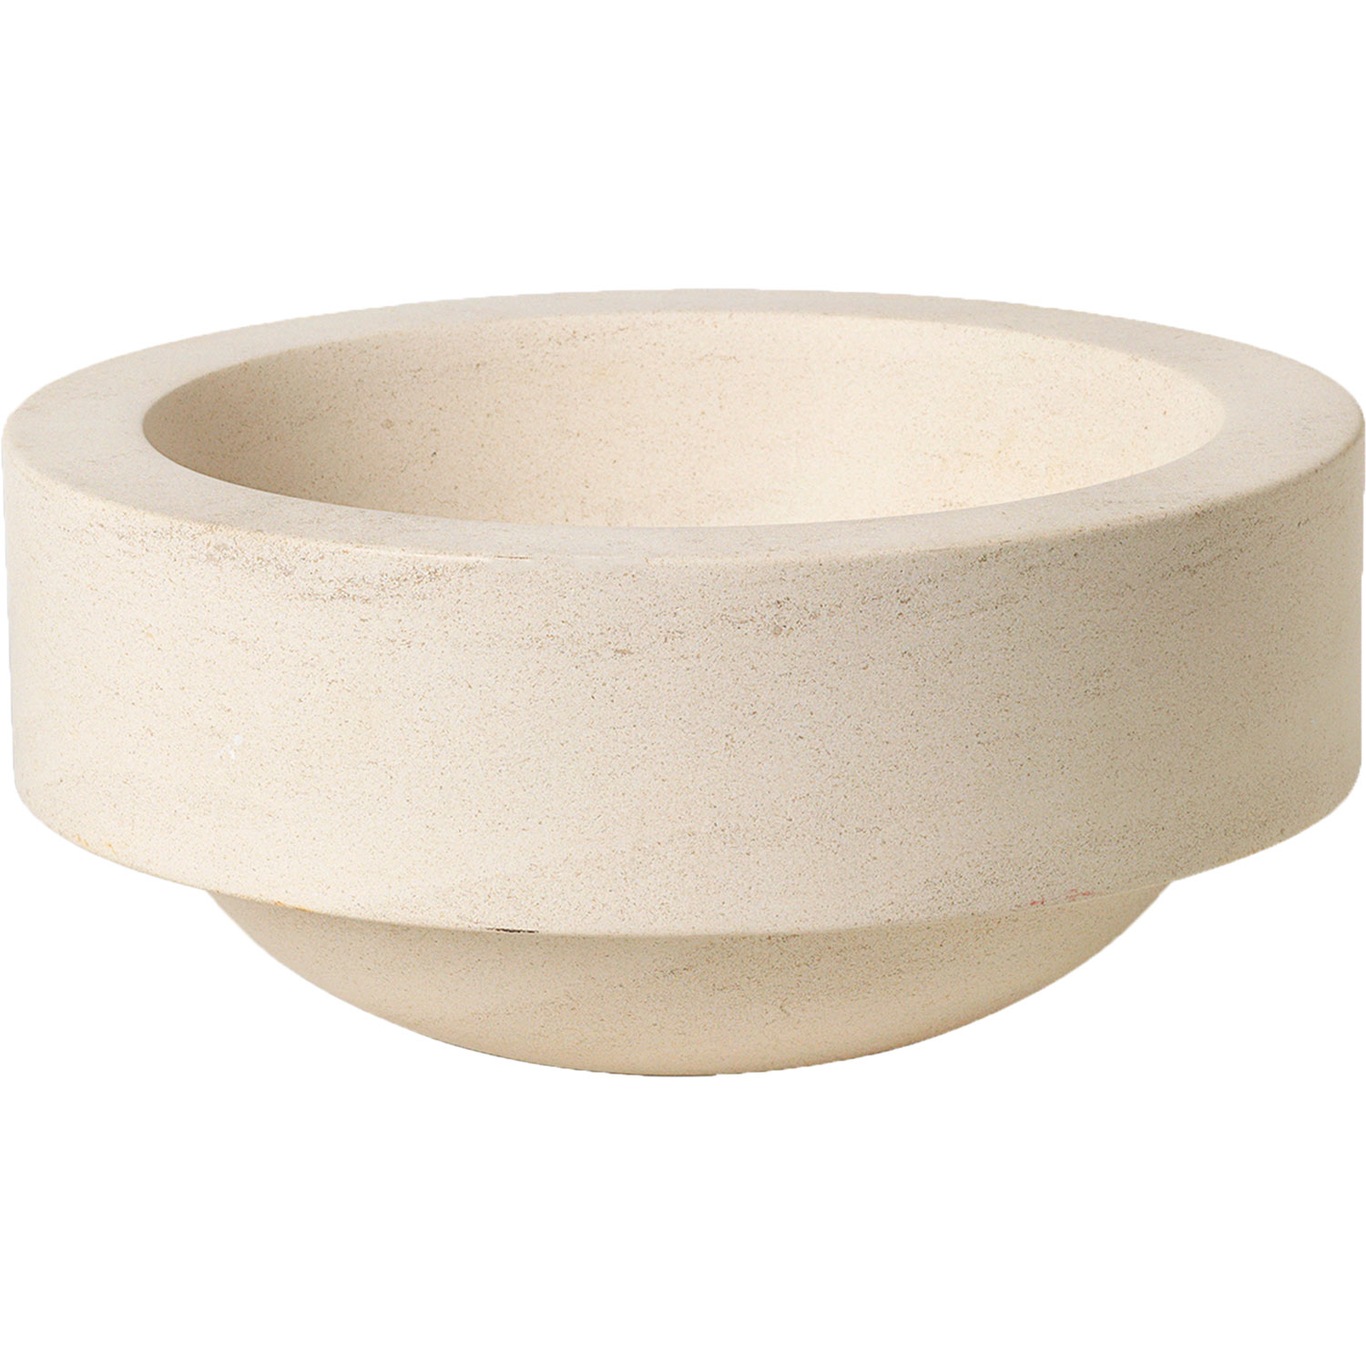 Gallery Objects 09 Bowl Ø29 cm, Lime Stone